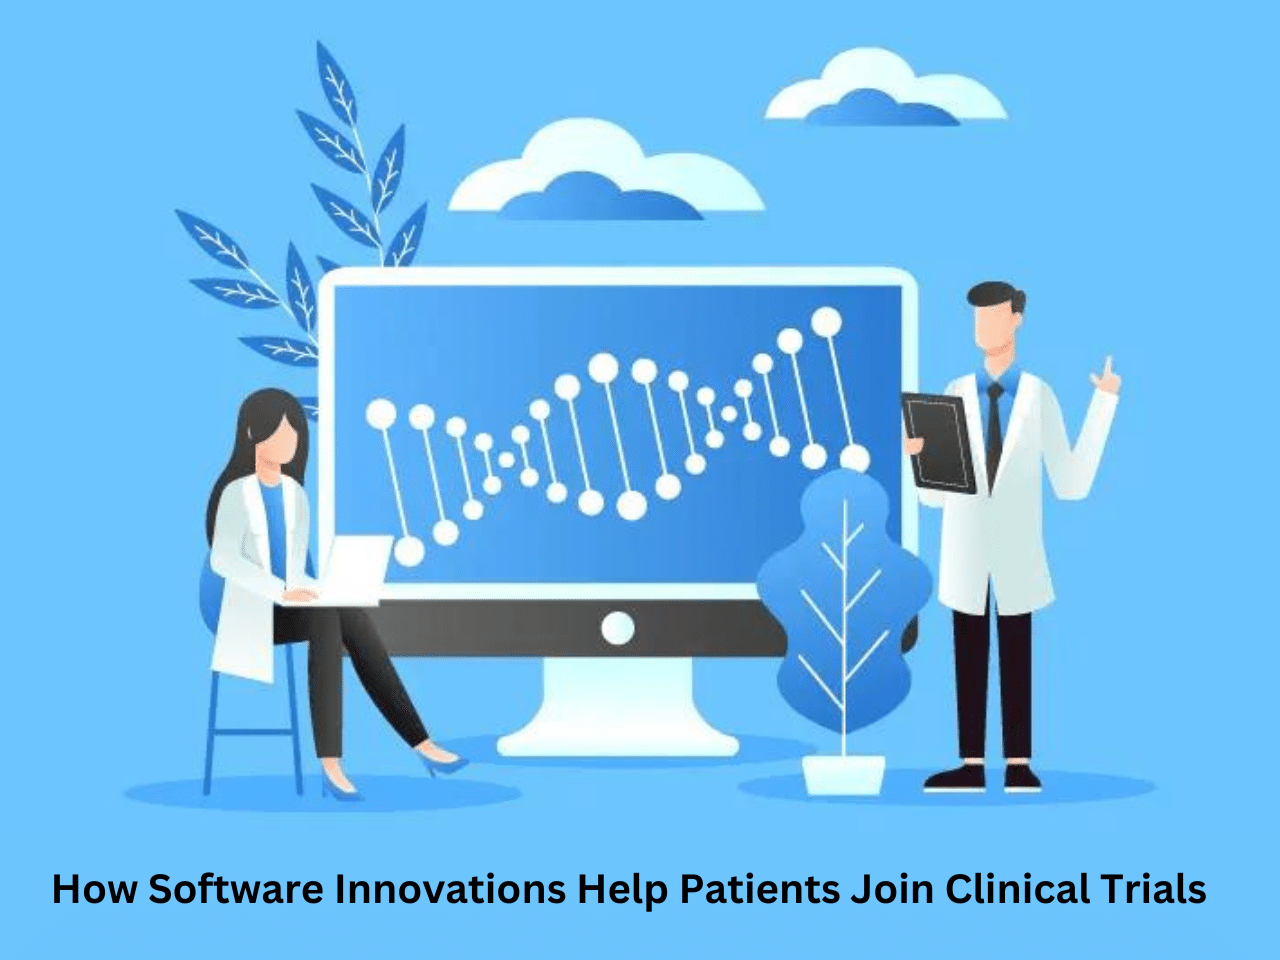 How Software Innovations Help Patients Join Clinical Trials